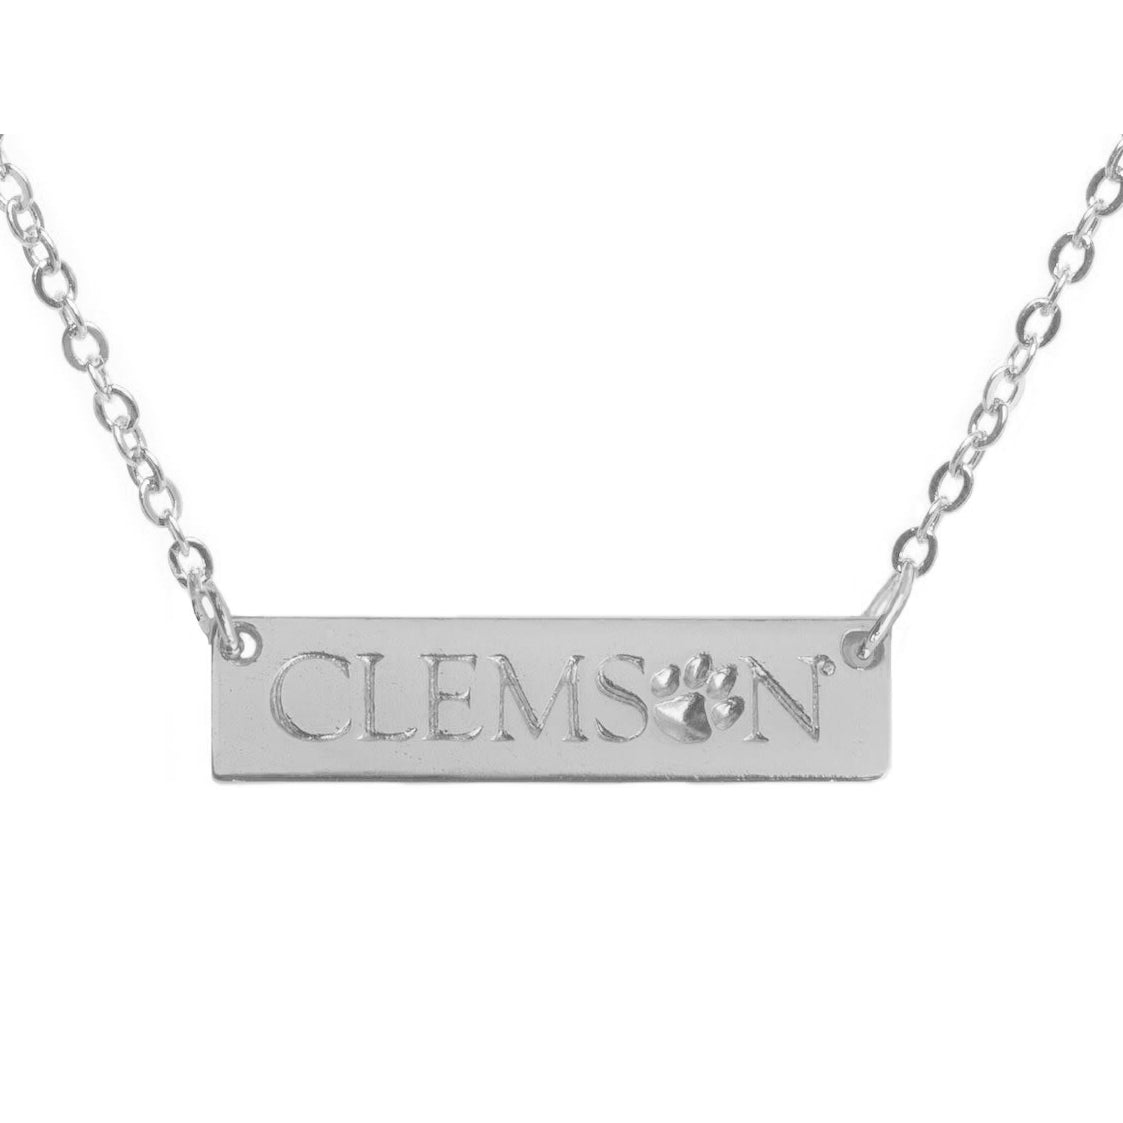 Shawn Paul Jewelry Clemson Tigers Bar Silver Plated Necklace